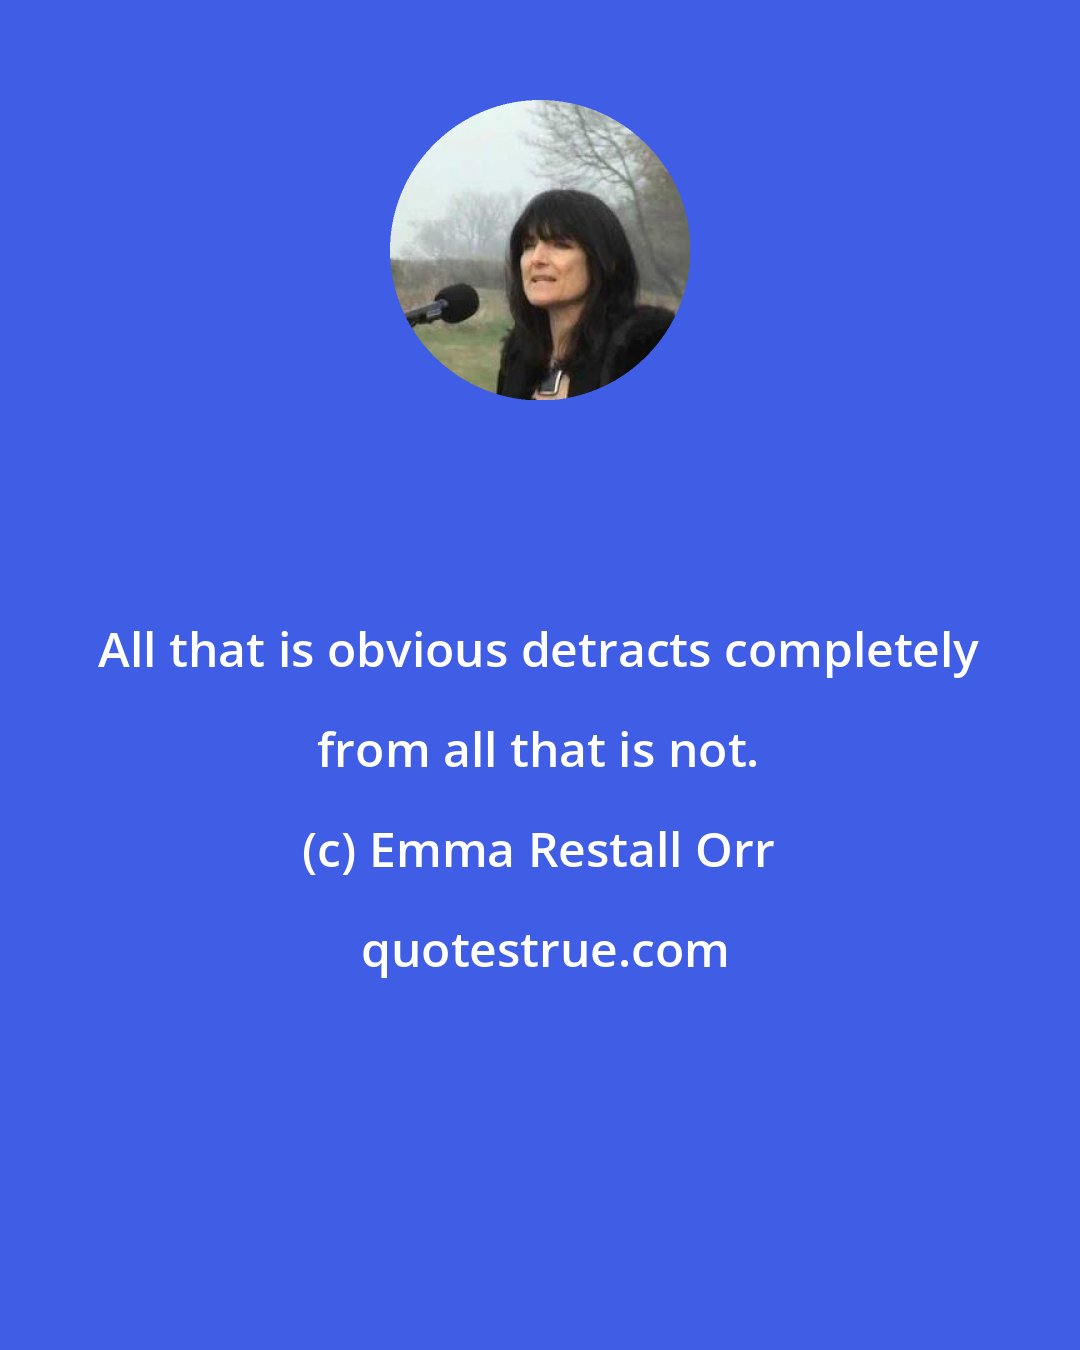 Emma Restall Orr: All that is obvious detracts completely from all that is not.